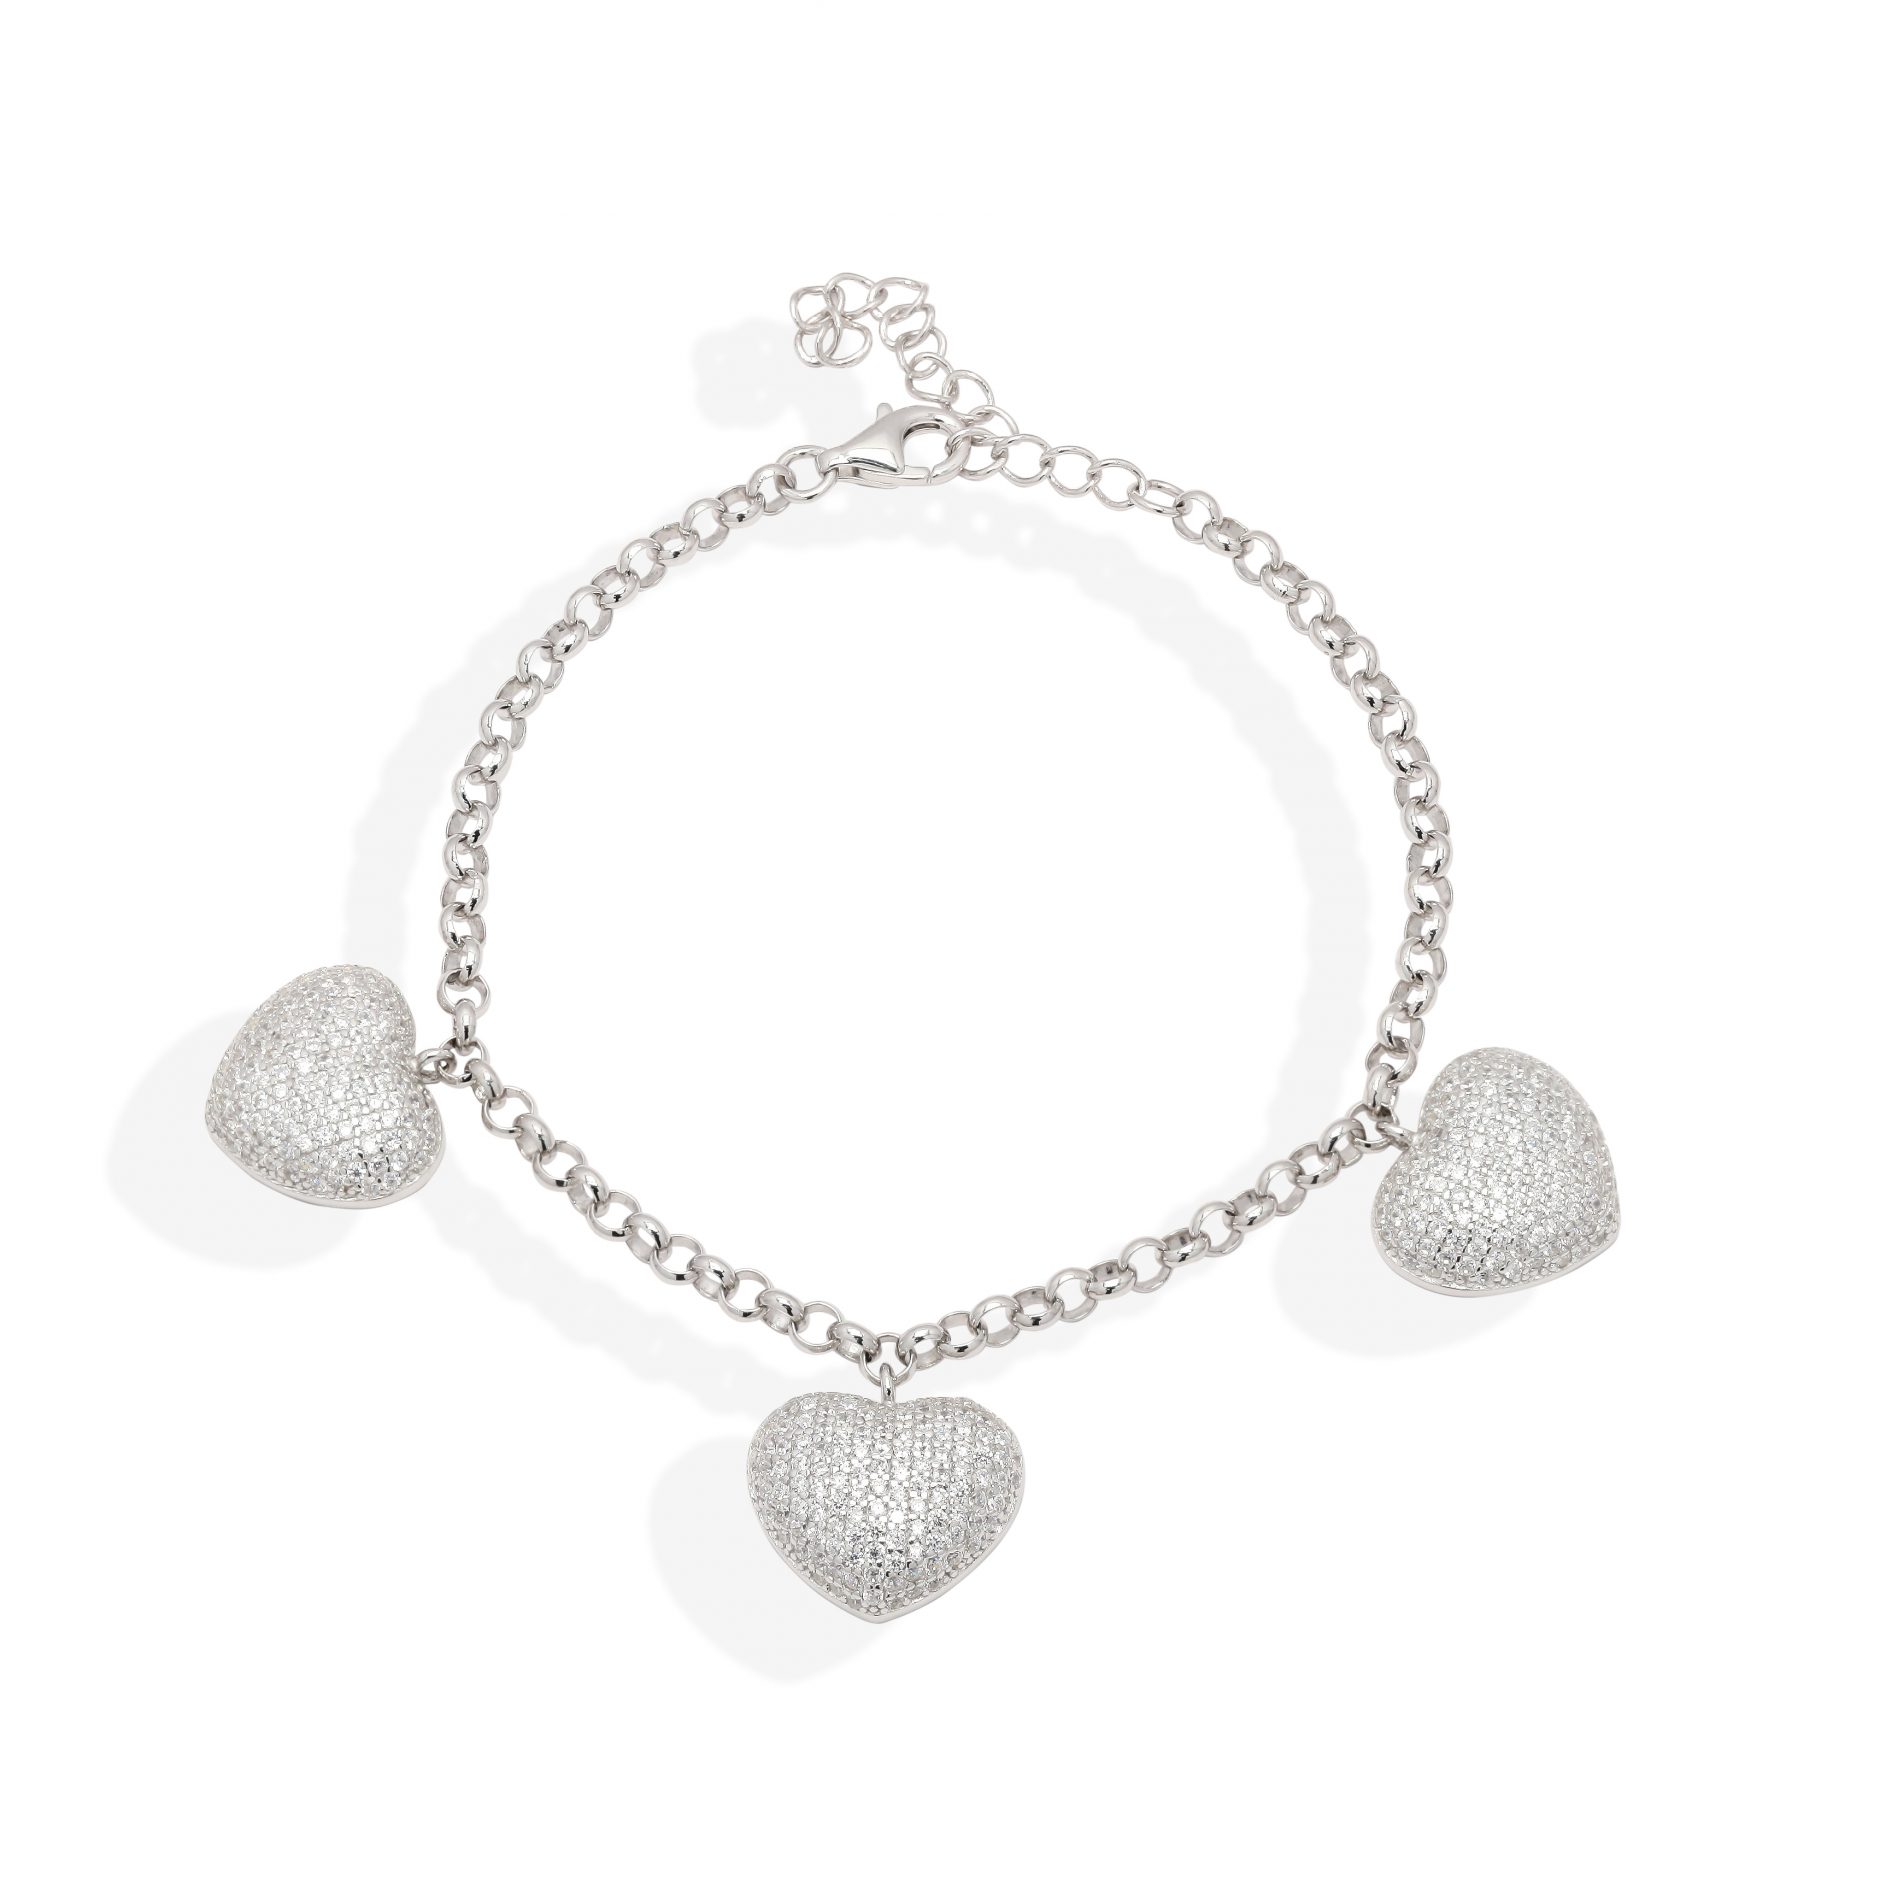 Sterling Silver Engraved Heart Bracelet with Birthstone and Star Charm |  Charming Engraving